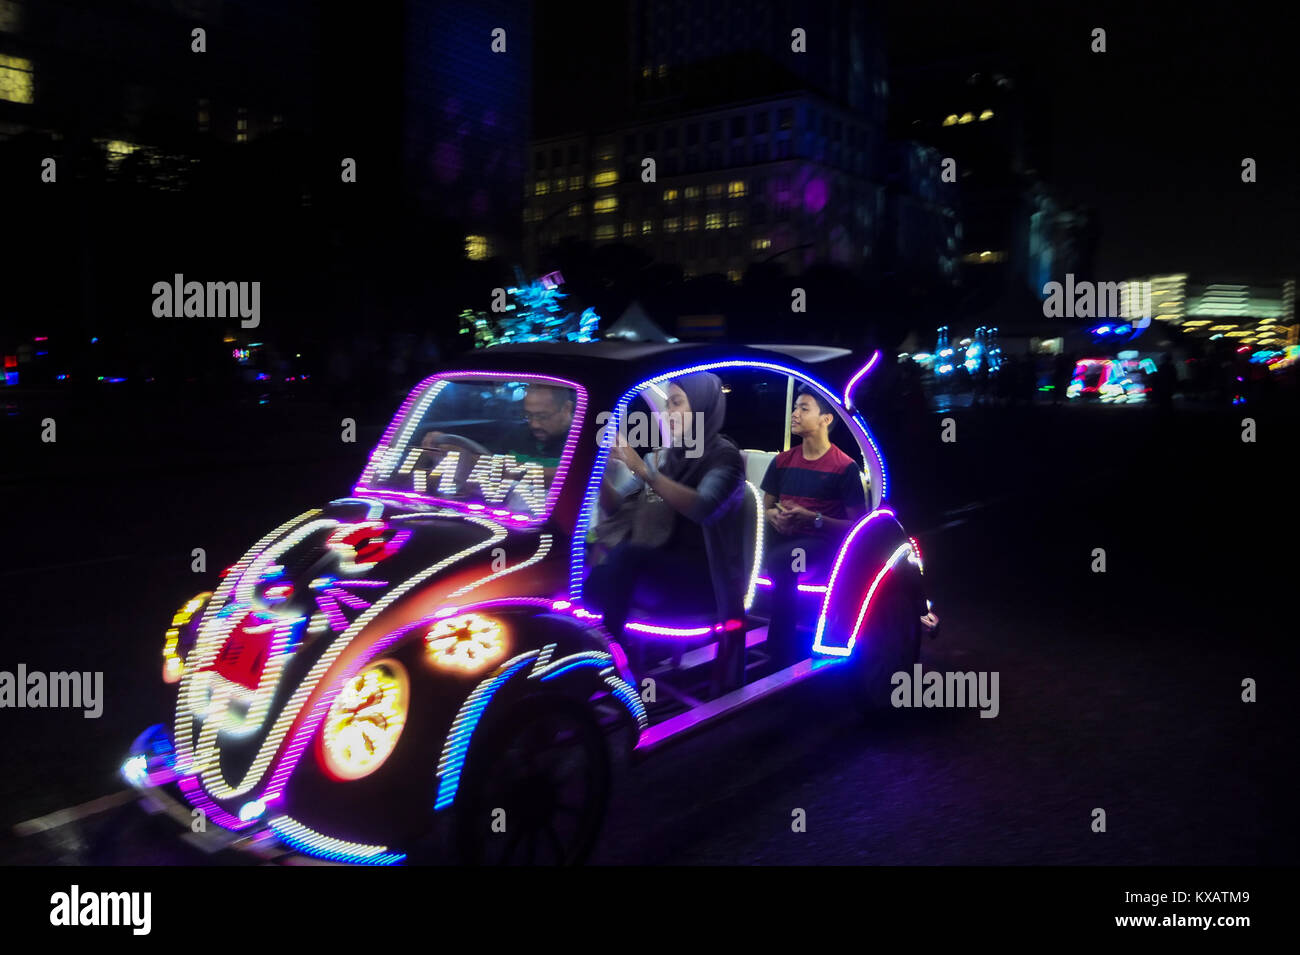 KUALA LUMPUR, MALAYSIA - DECEMBER 28: People plays a car light made from L.E.D during the Putrajaya Lighting Festival on December 28, 2017 in Putrajaya, Malaysia. The four-night festival featured a light art communities and university students in Malaysia showcasing their creativity of light-themed events, including Luminous lighting effect show, decorative arch and light structure exhibits, car light show, night fun ride, wayang kulit performance (shadow puppetry), and a light garden . Credit: Samsul Said/AFLO/Alamy Live News Stock Photo